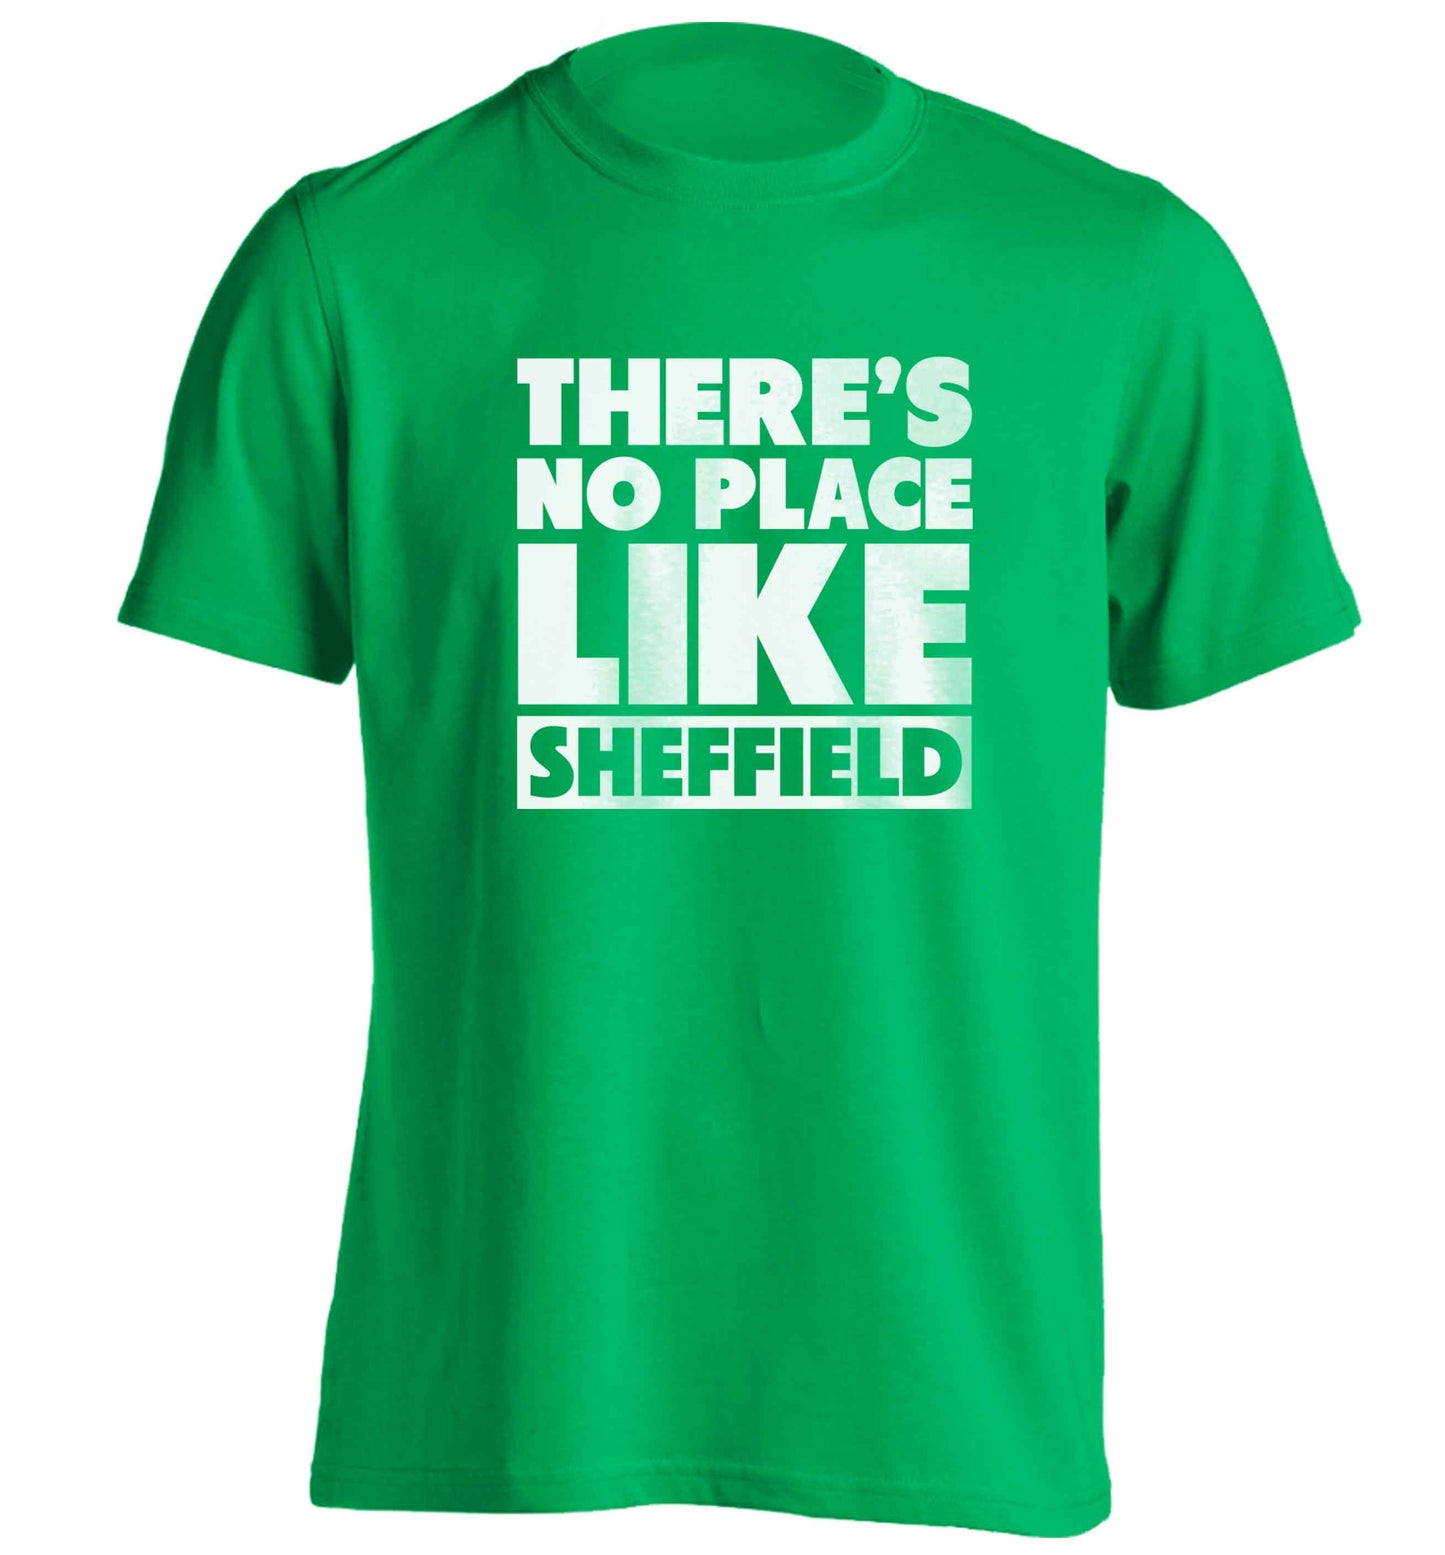 There's no place like Sheffield adults unisex green Tshirt 2XL